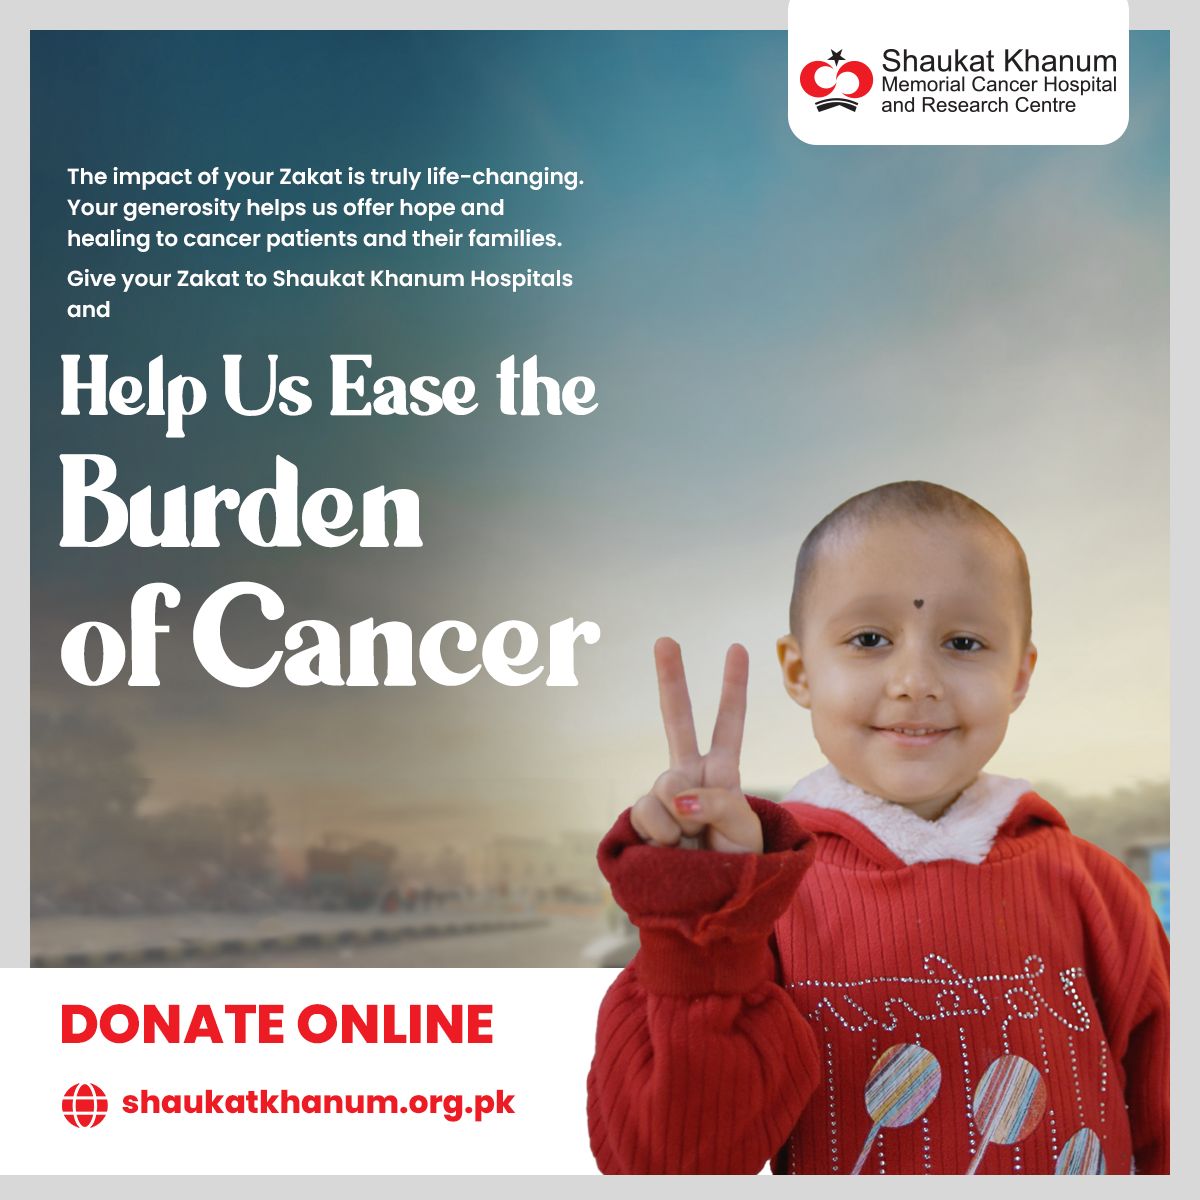 Your Zakat can help us make a difference in the lives of cancer patients and their families. 

Give Zakat 👉 shaukatkhanum.org.pk/zakat/

For home collection of your Zakat and donations
📞 080011555 | WhatsApp at 03000666363
#ZakatForShaukatKhanum